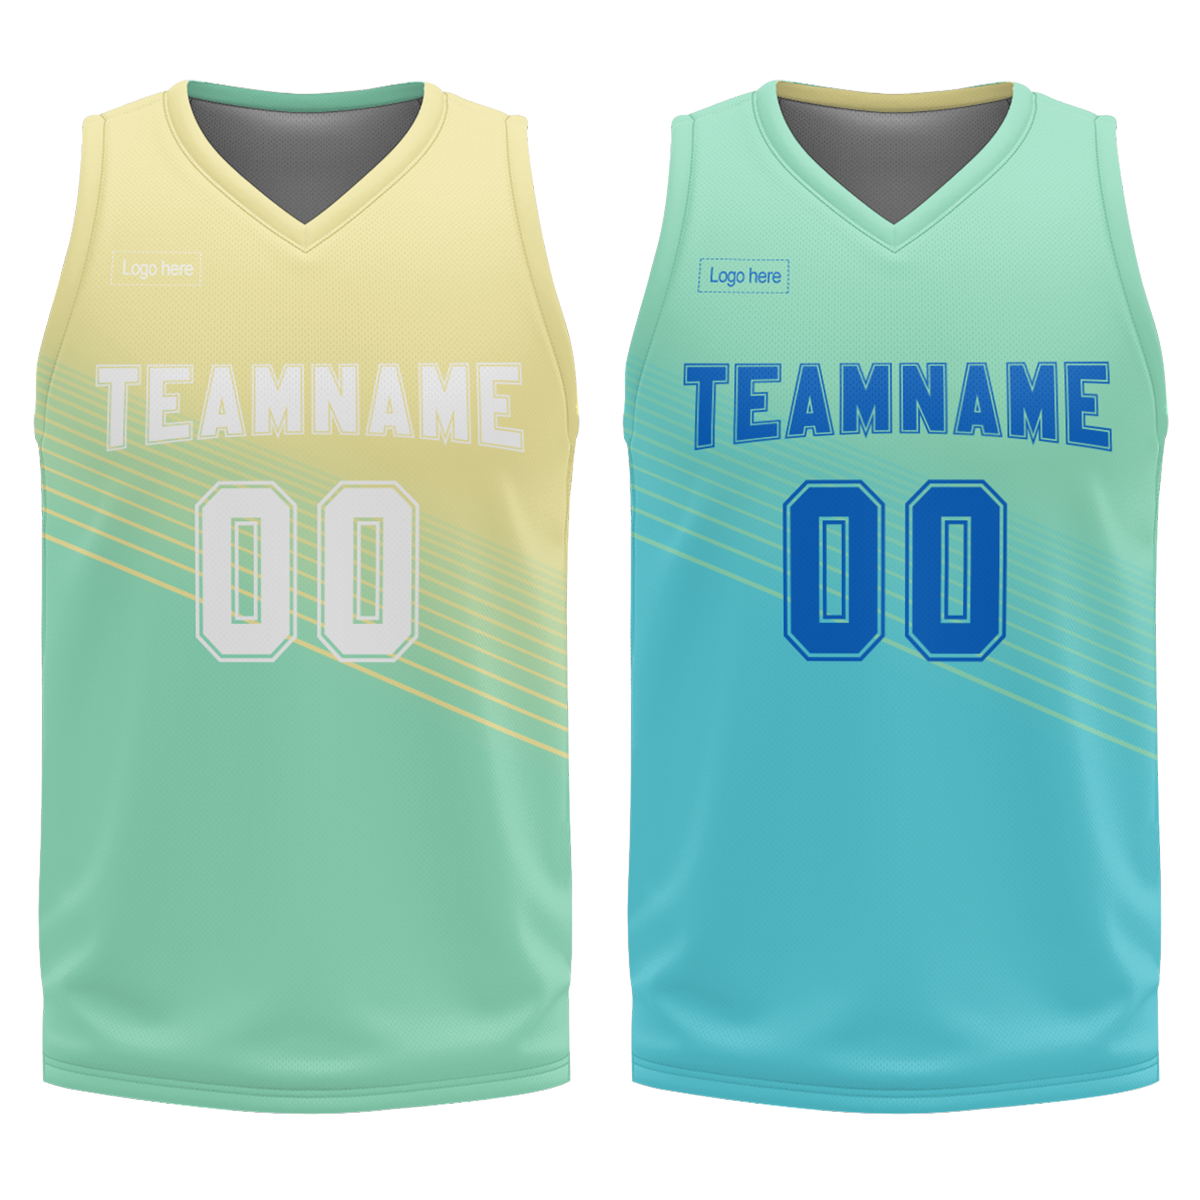 custom-sublimated-breathable-collage-basketball-shirts-full-printed-mens-reversible-blank-basketball-jersey-uniform-clothes-at-cj-pod-4